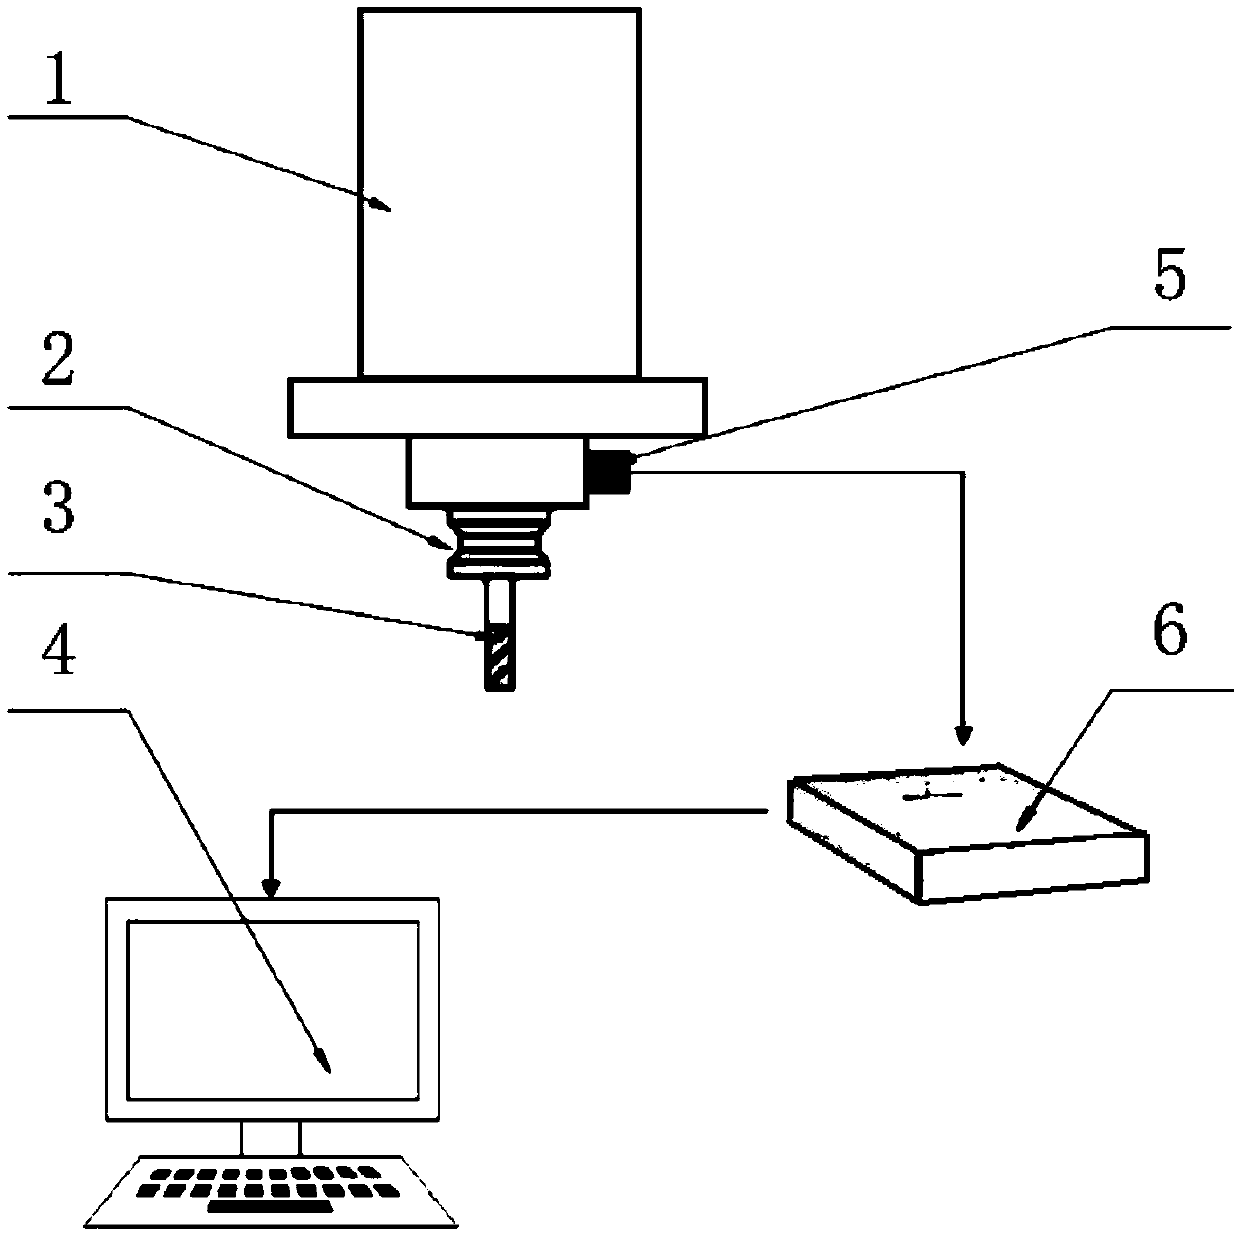 Milling chatter online detection method based on power spectral entropy difference